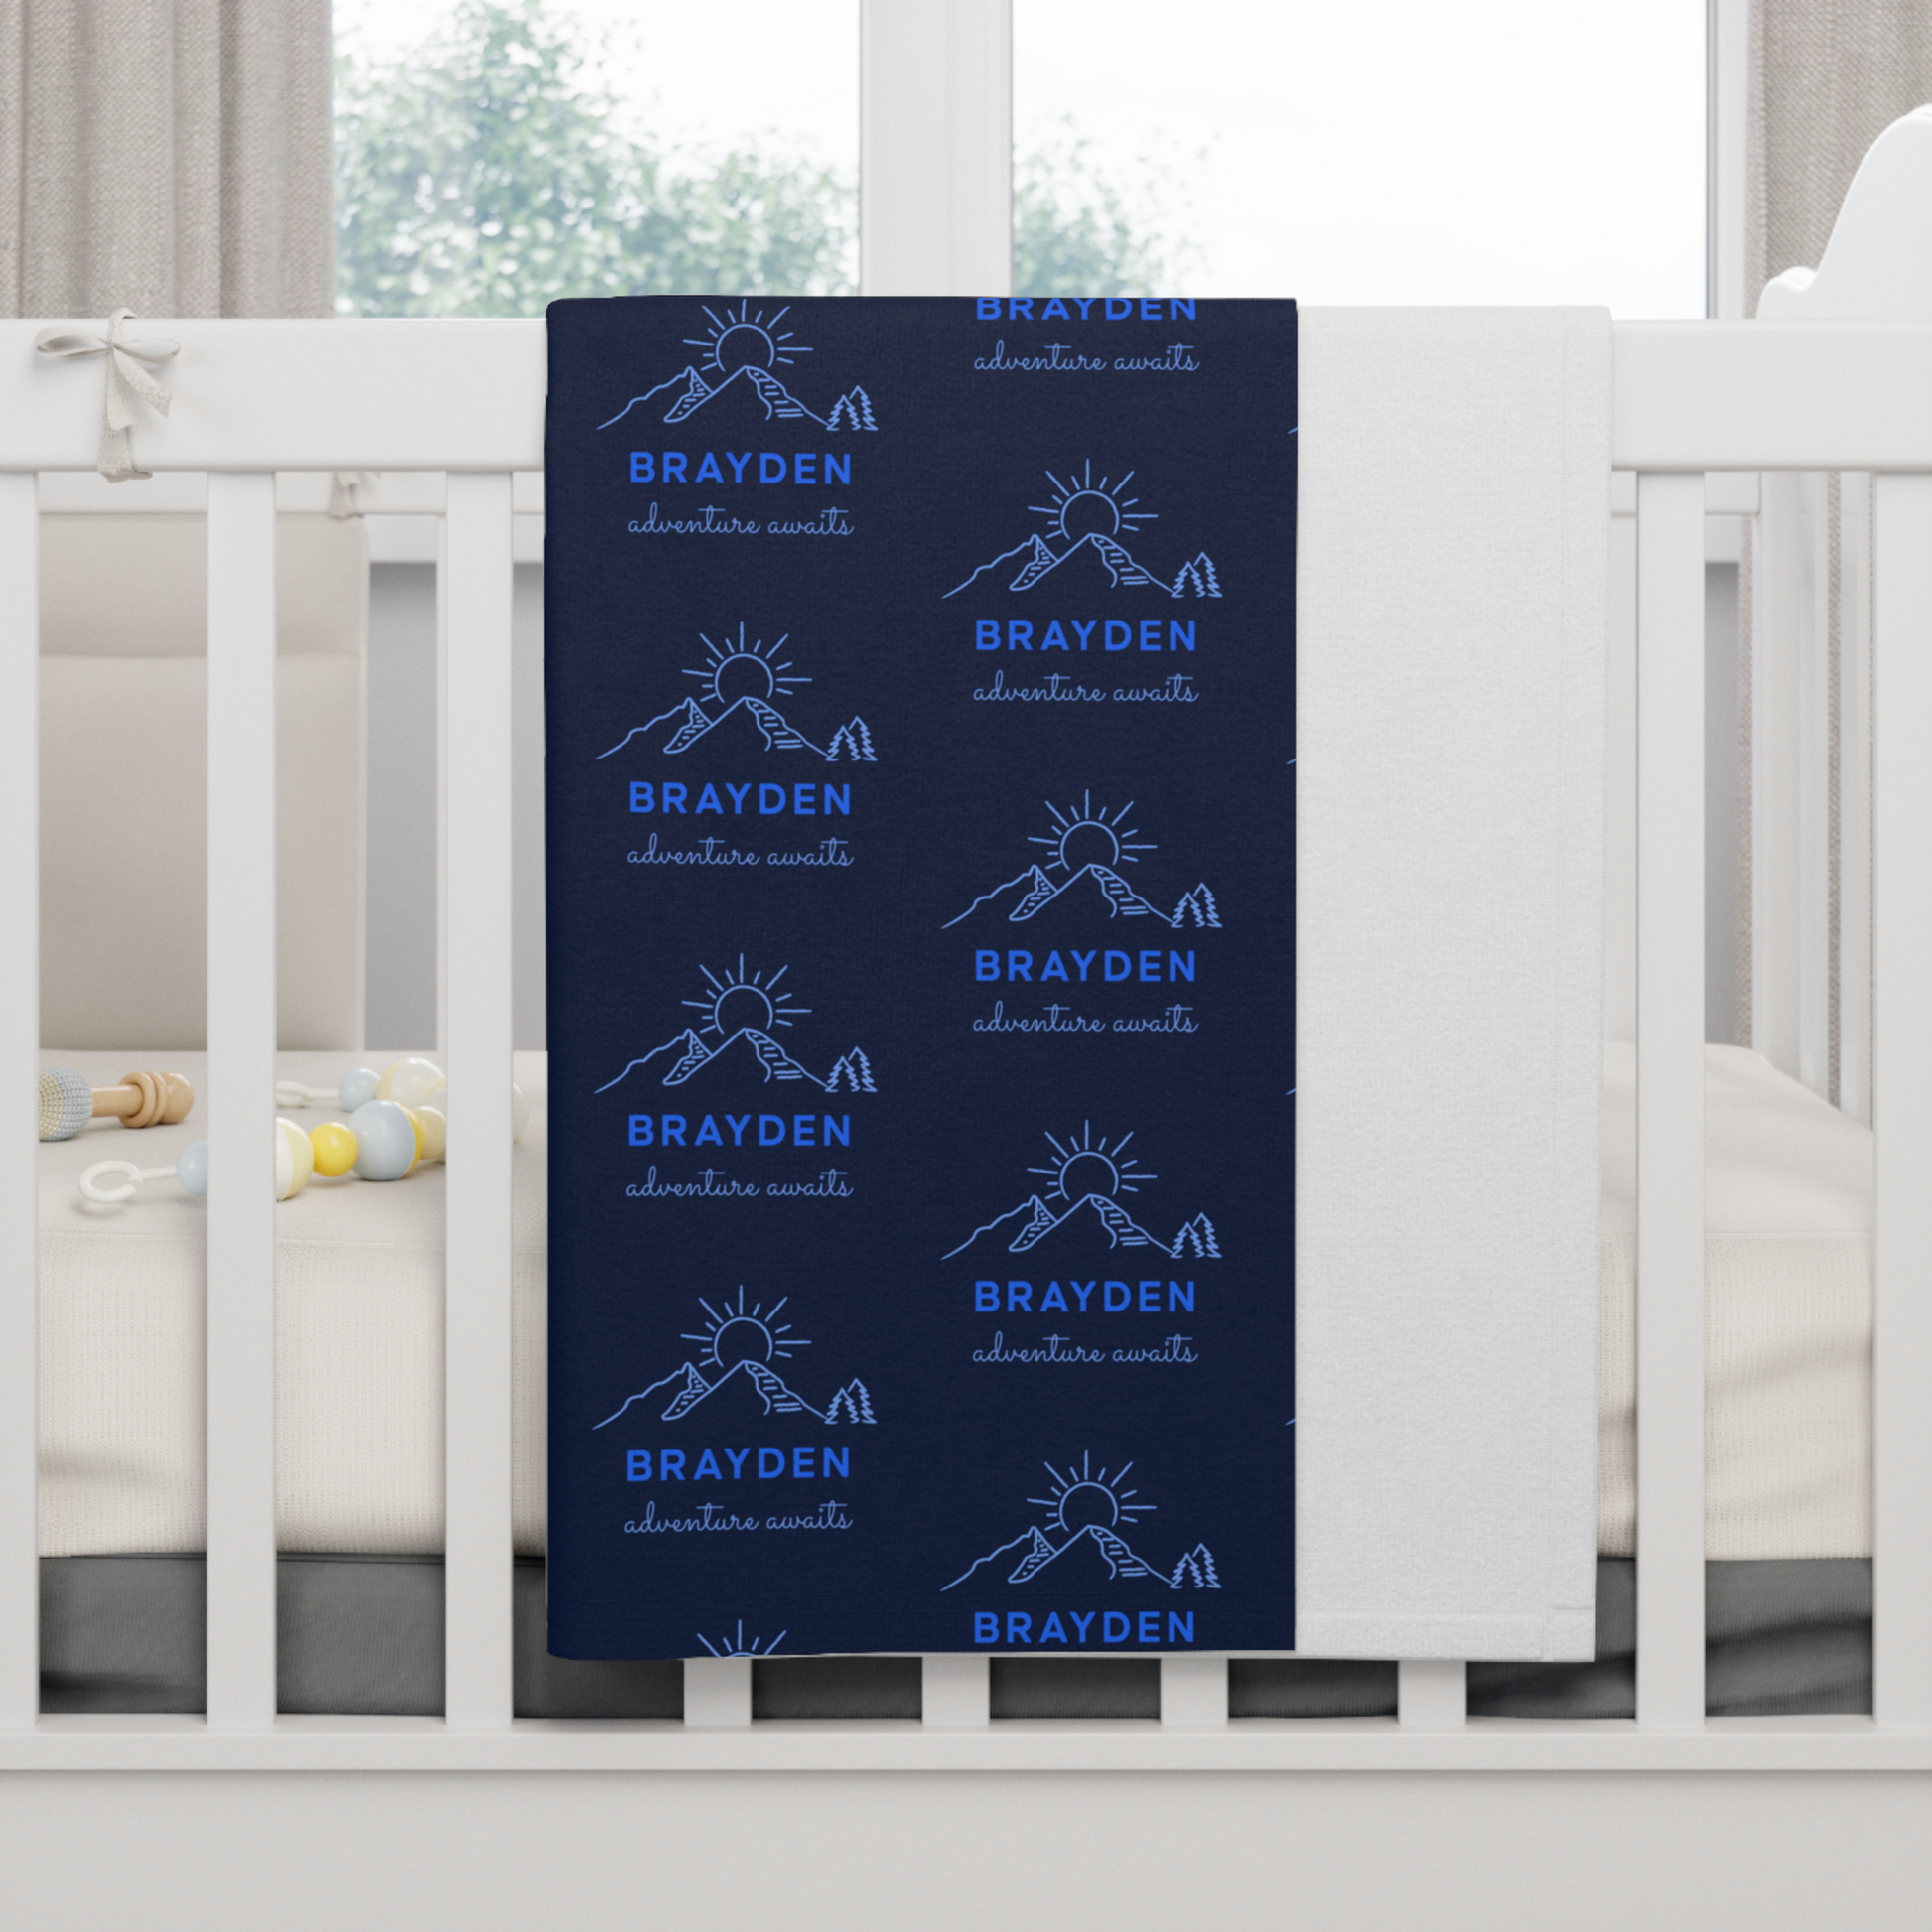 Fleece personalized baby blanket in mountain adventure pattern hung over side of white crib with window in the background